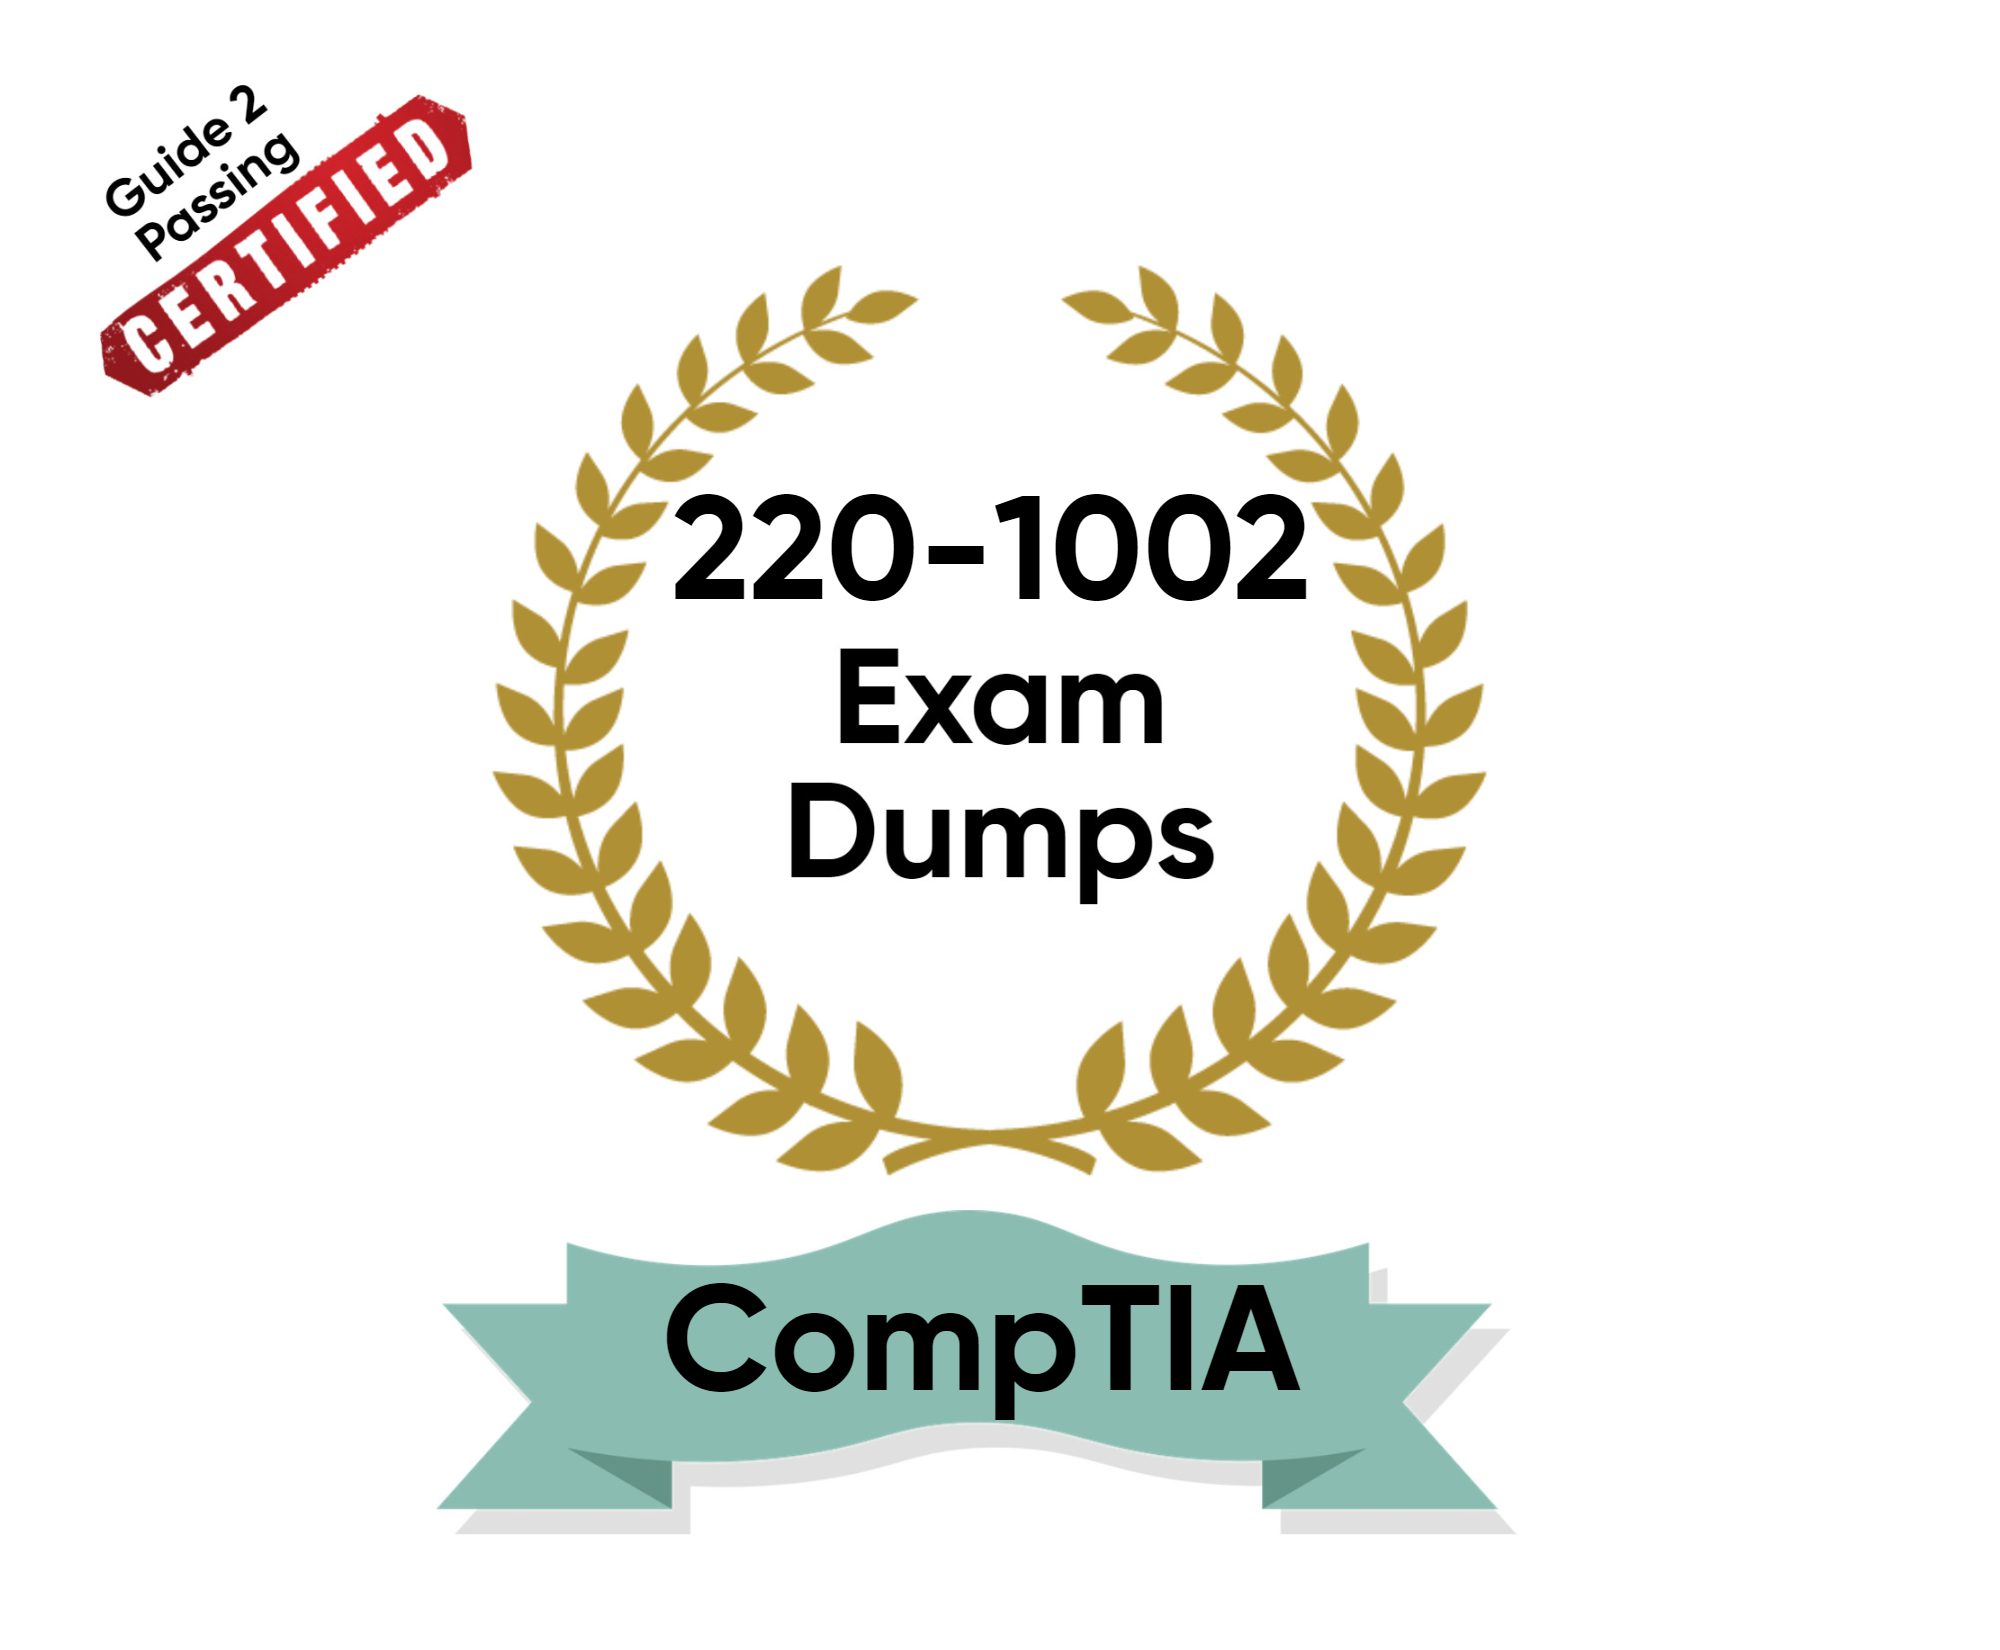 Pass Your CompTIA 220-1002 Exam Dumps From Guide 2 Passing